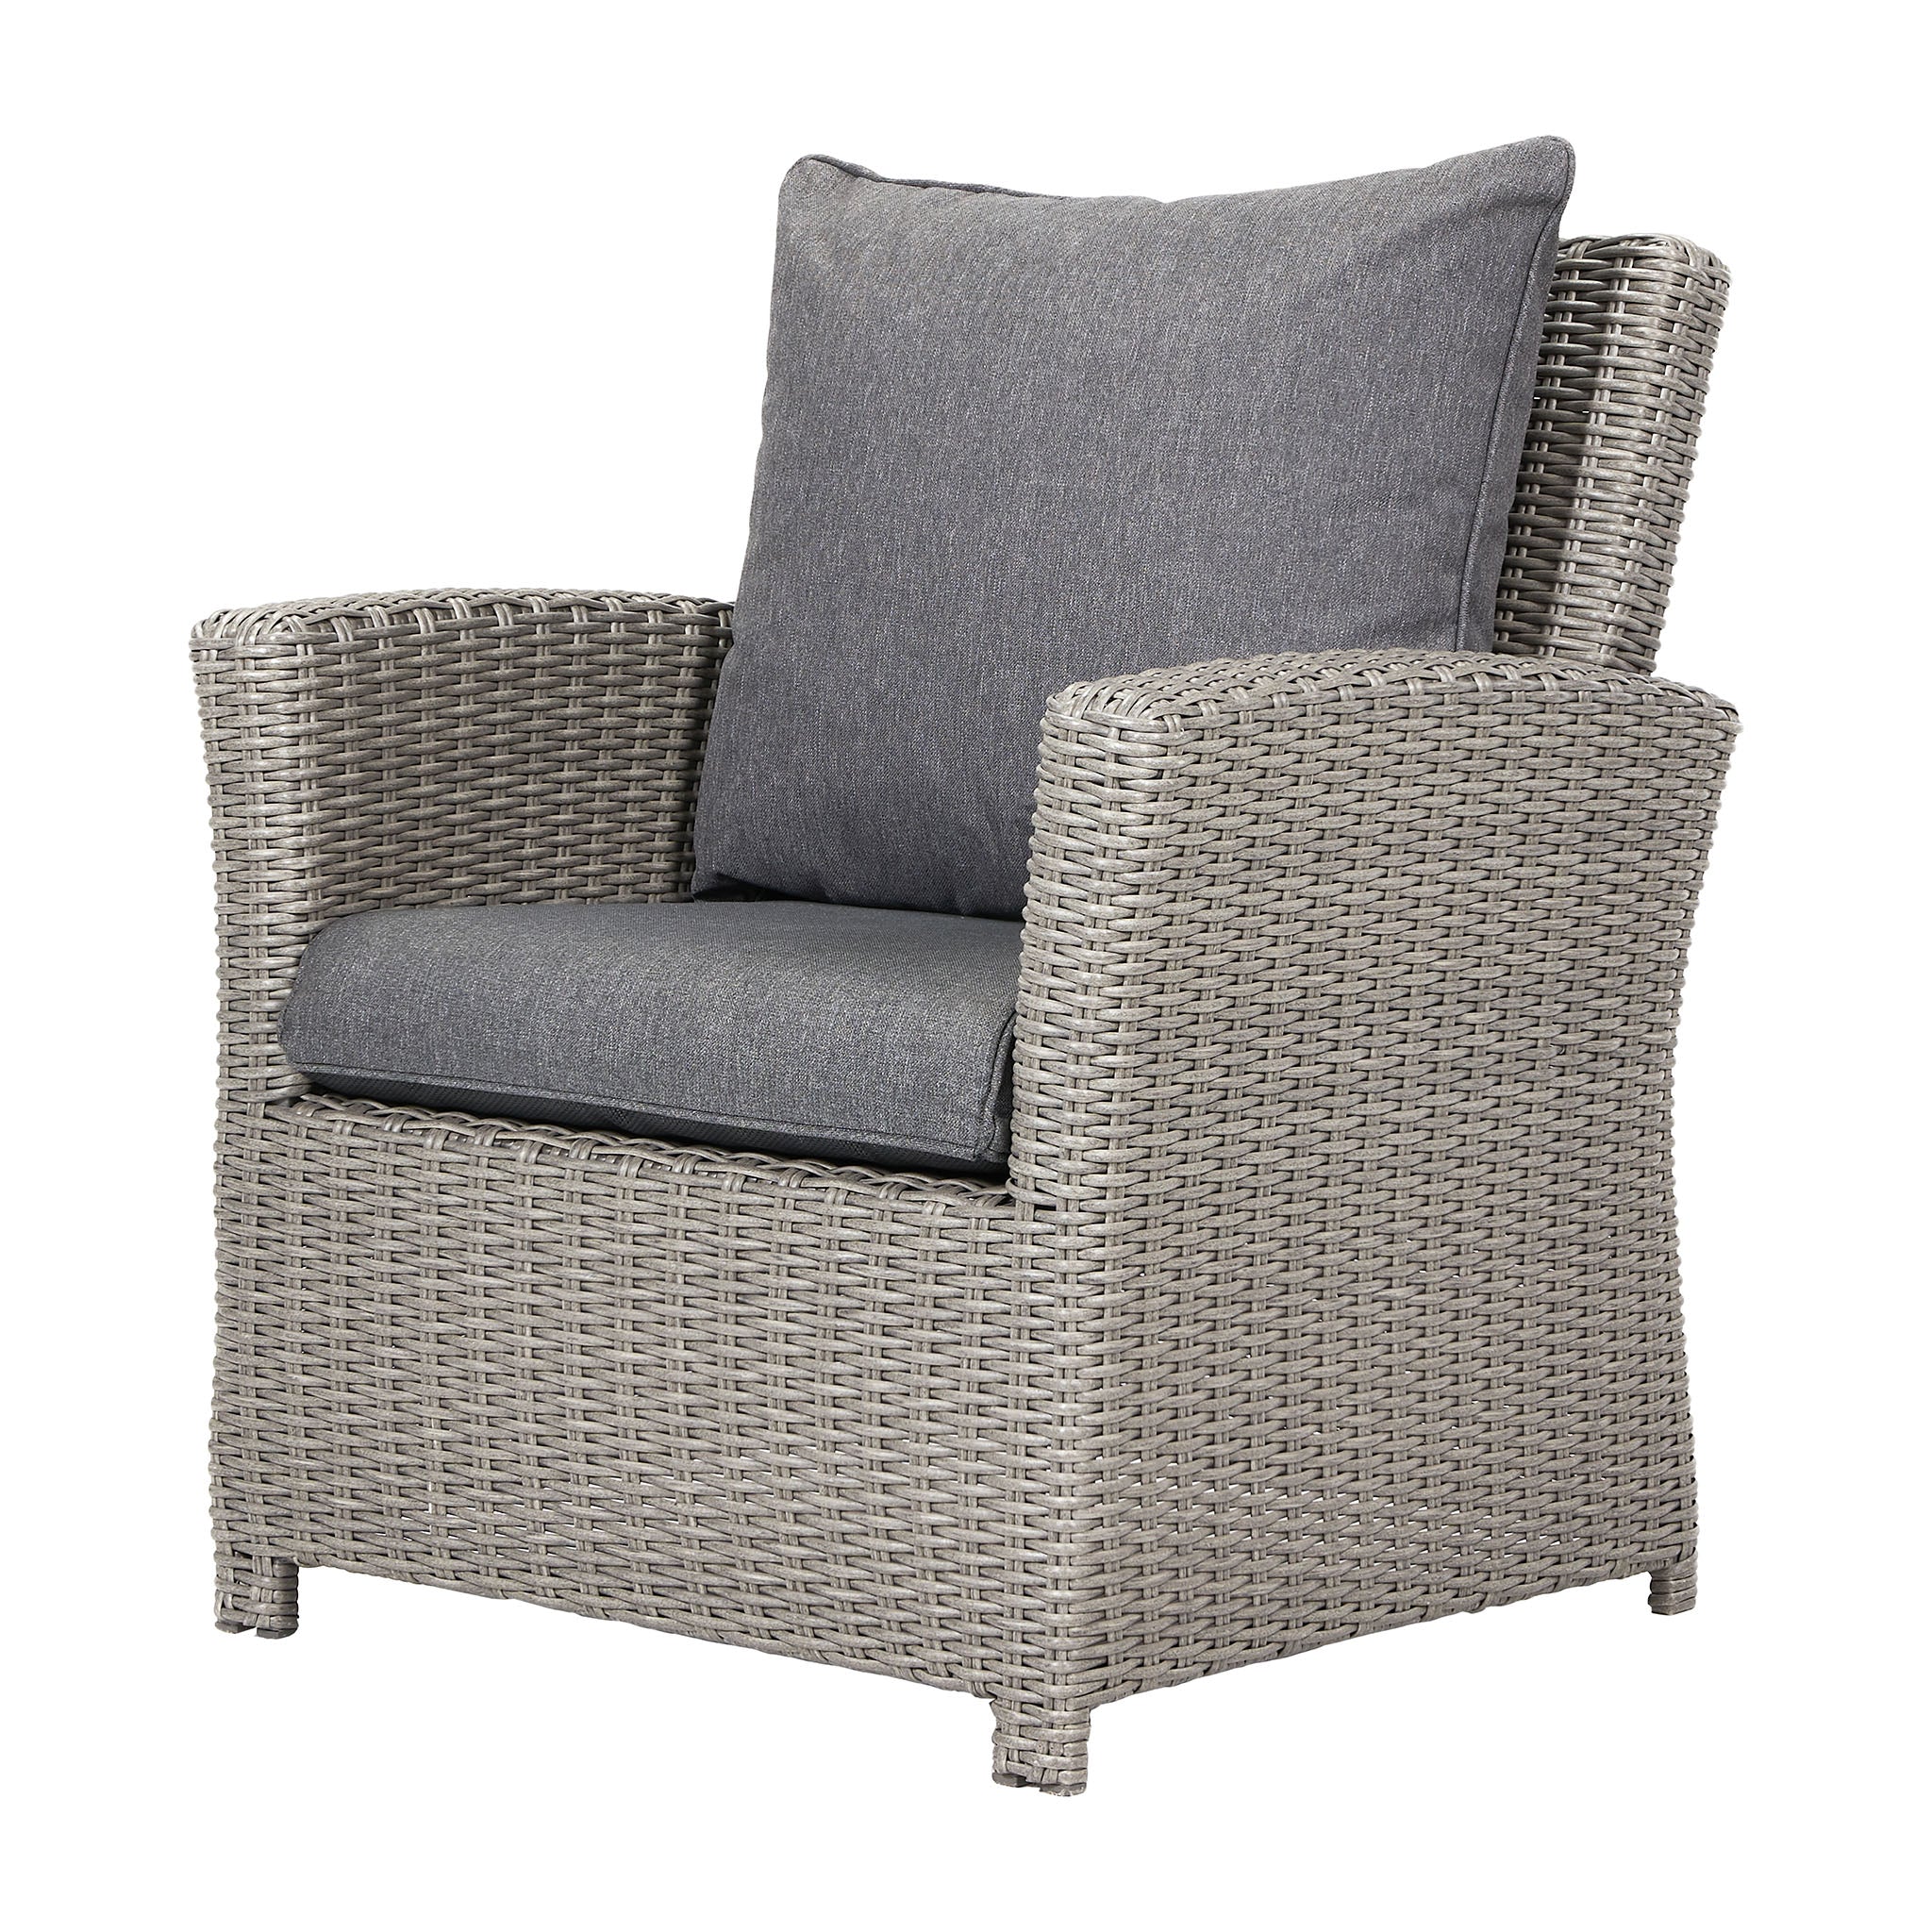 Barbados 3 Seat Rattan Sofa Set with Rising Table in Slate Grey